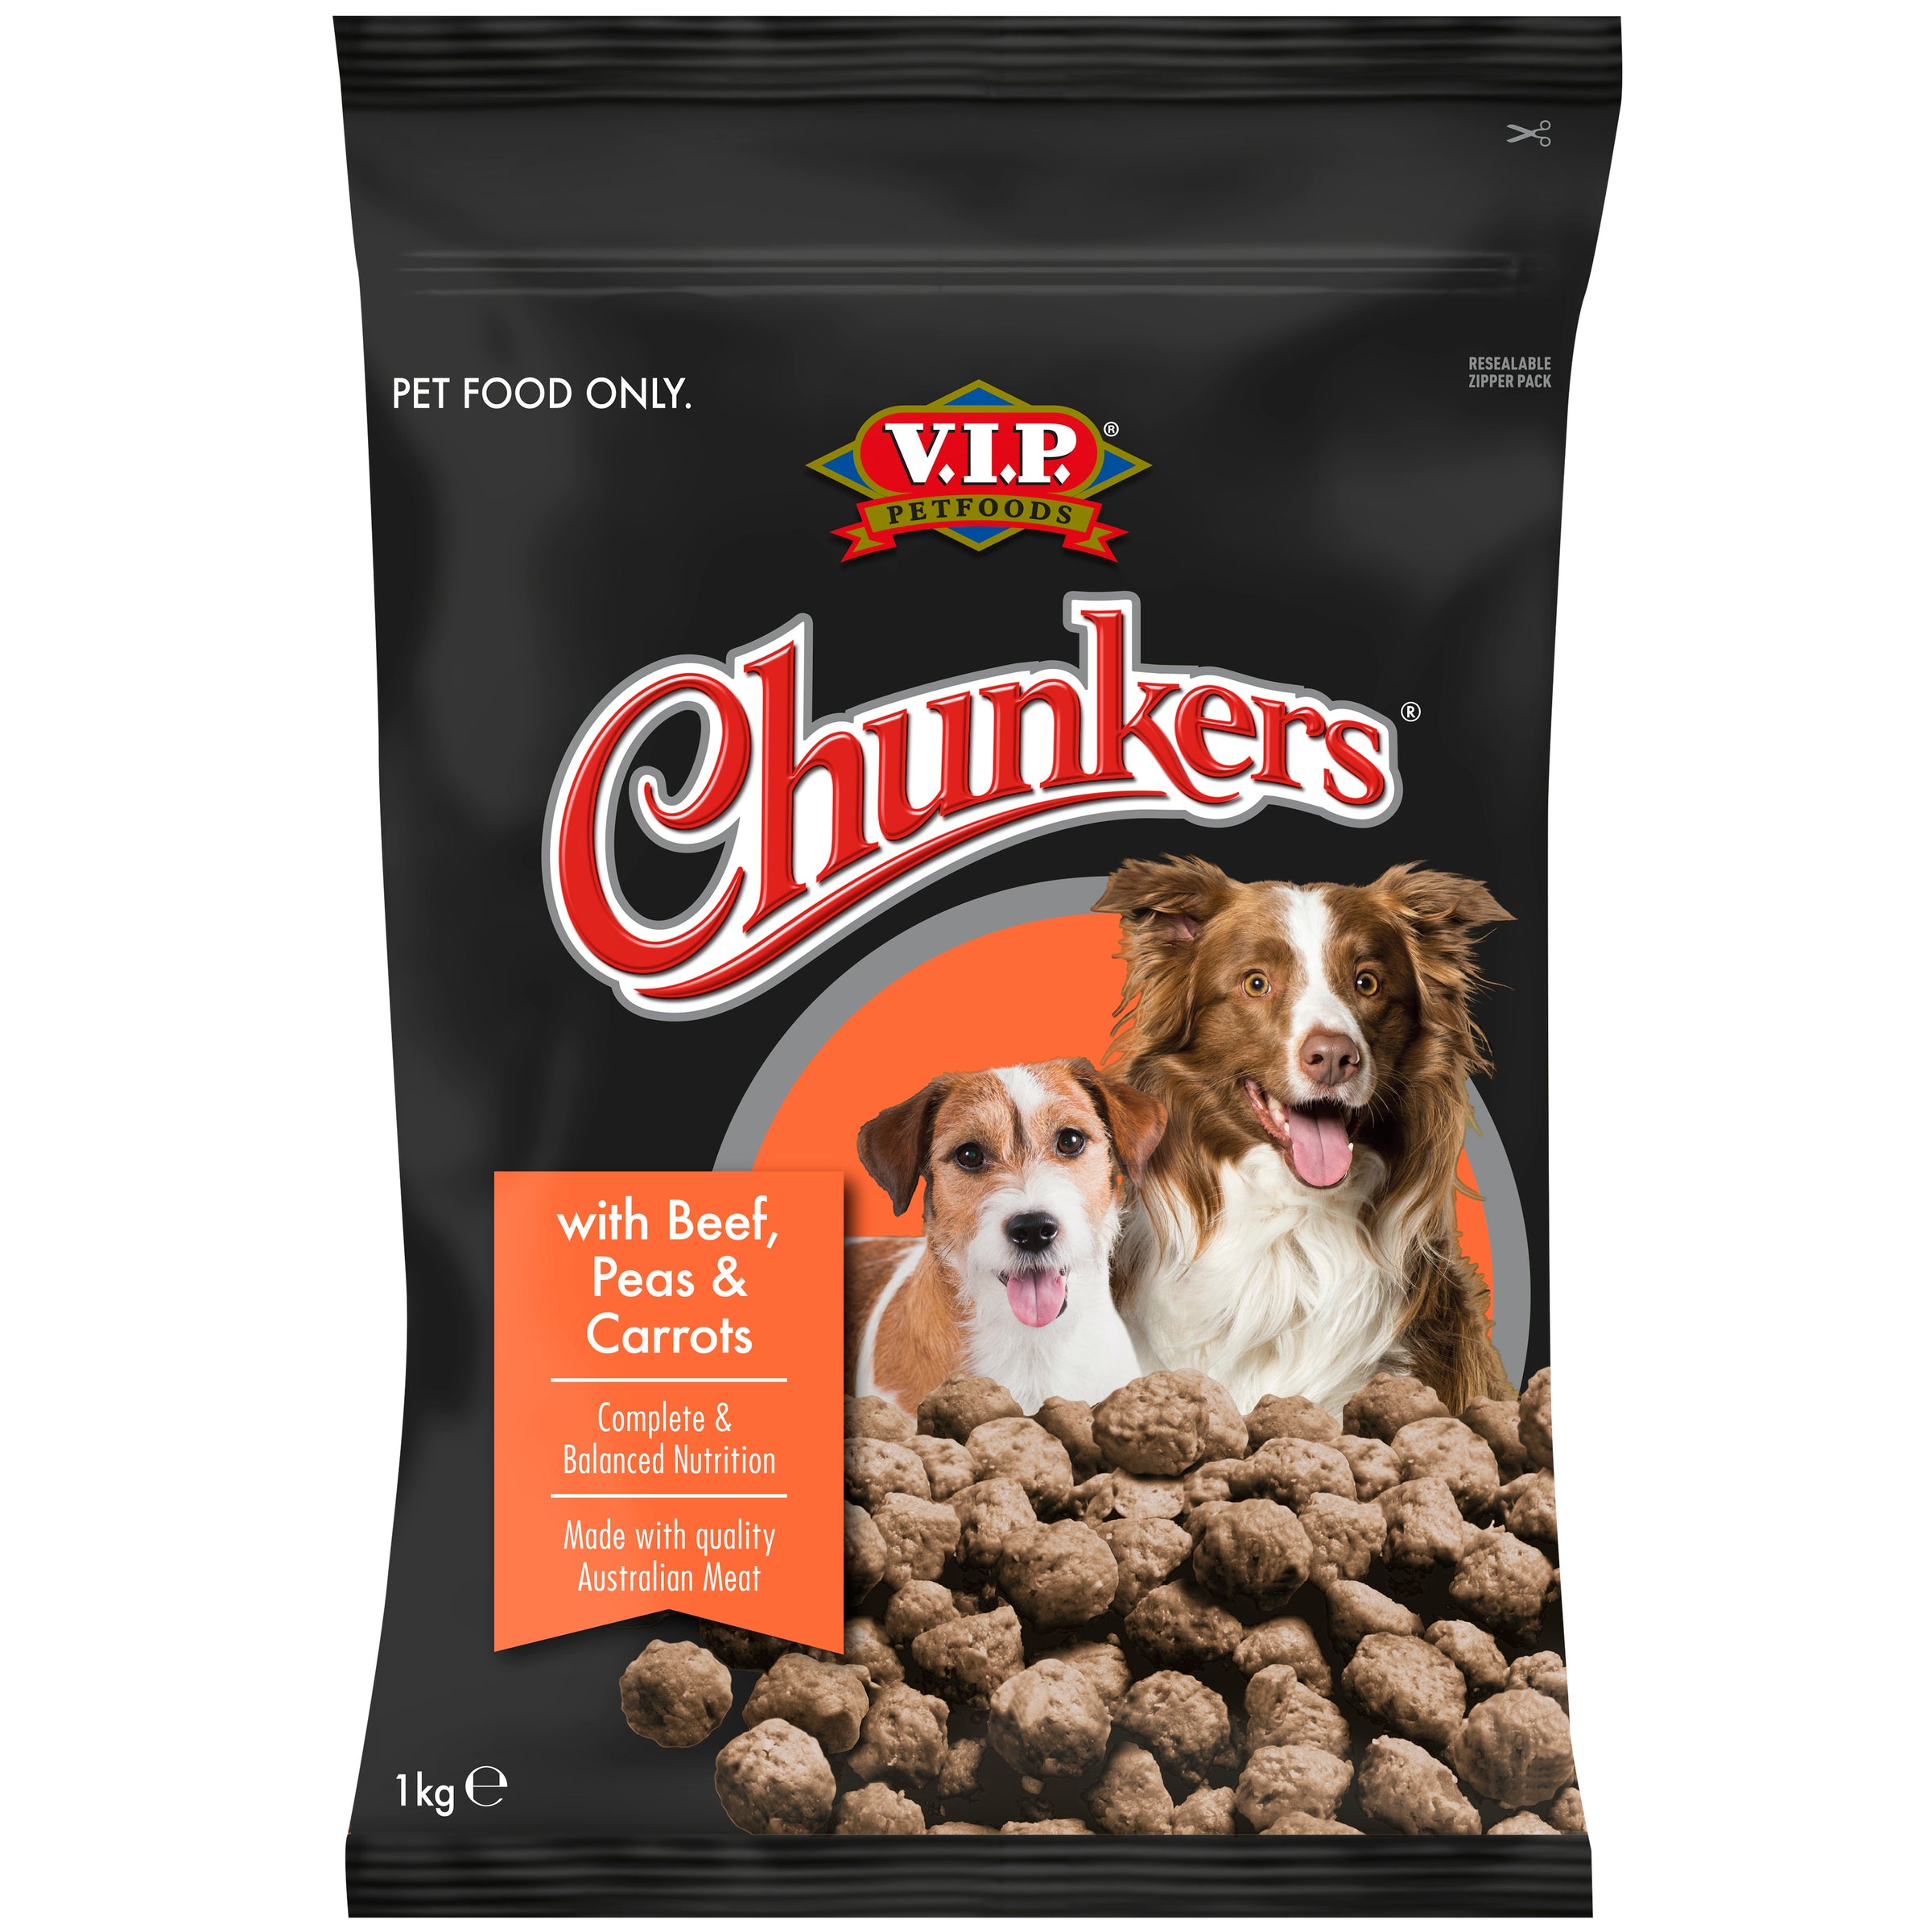 V.I.P. Petfoods Chunkers Meatballs with Beef Carrots & Green Peas Chilled Dog Food 1kg